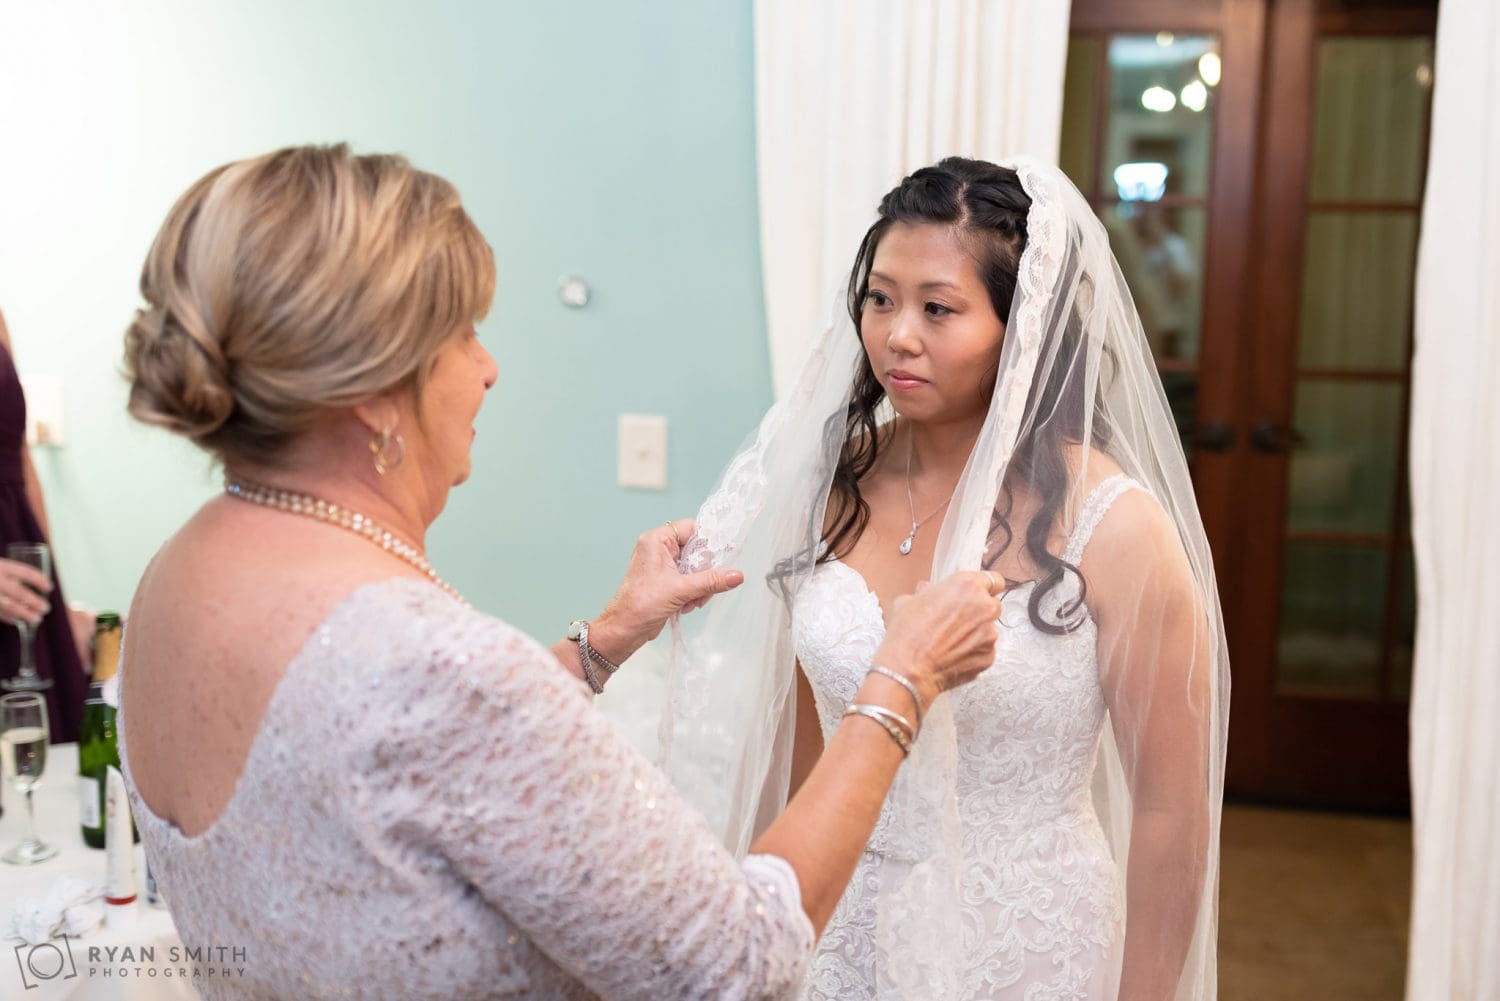 Mom helping bride with her veil 21 Main Events at North Beach